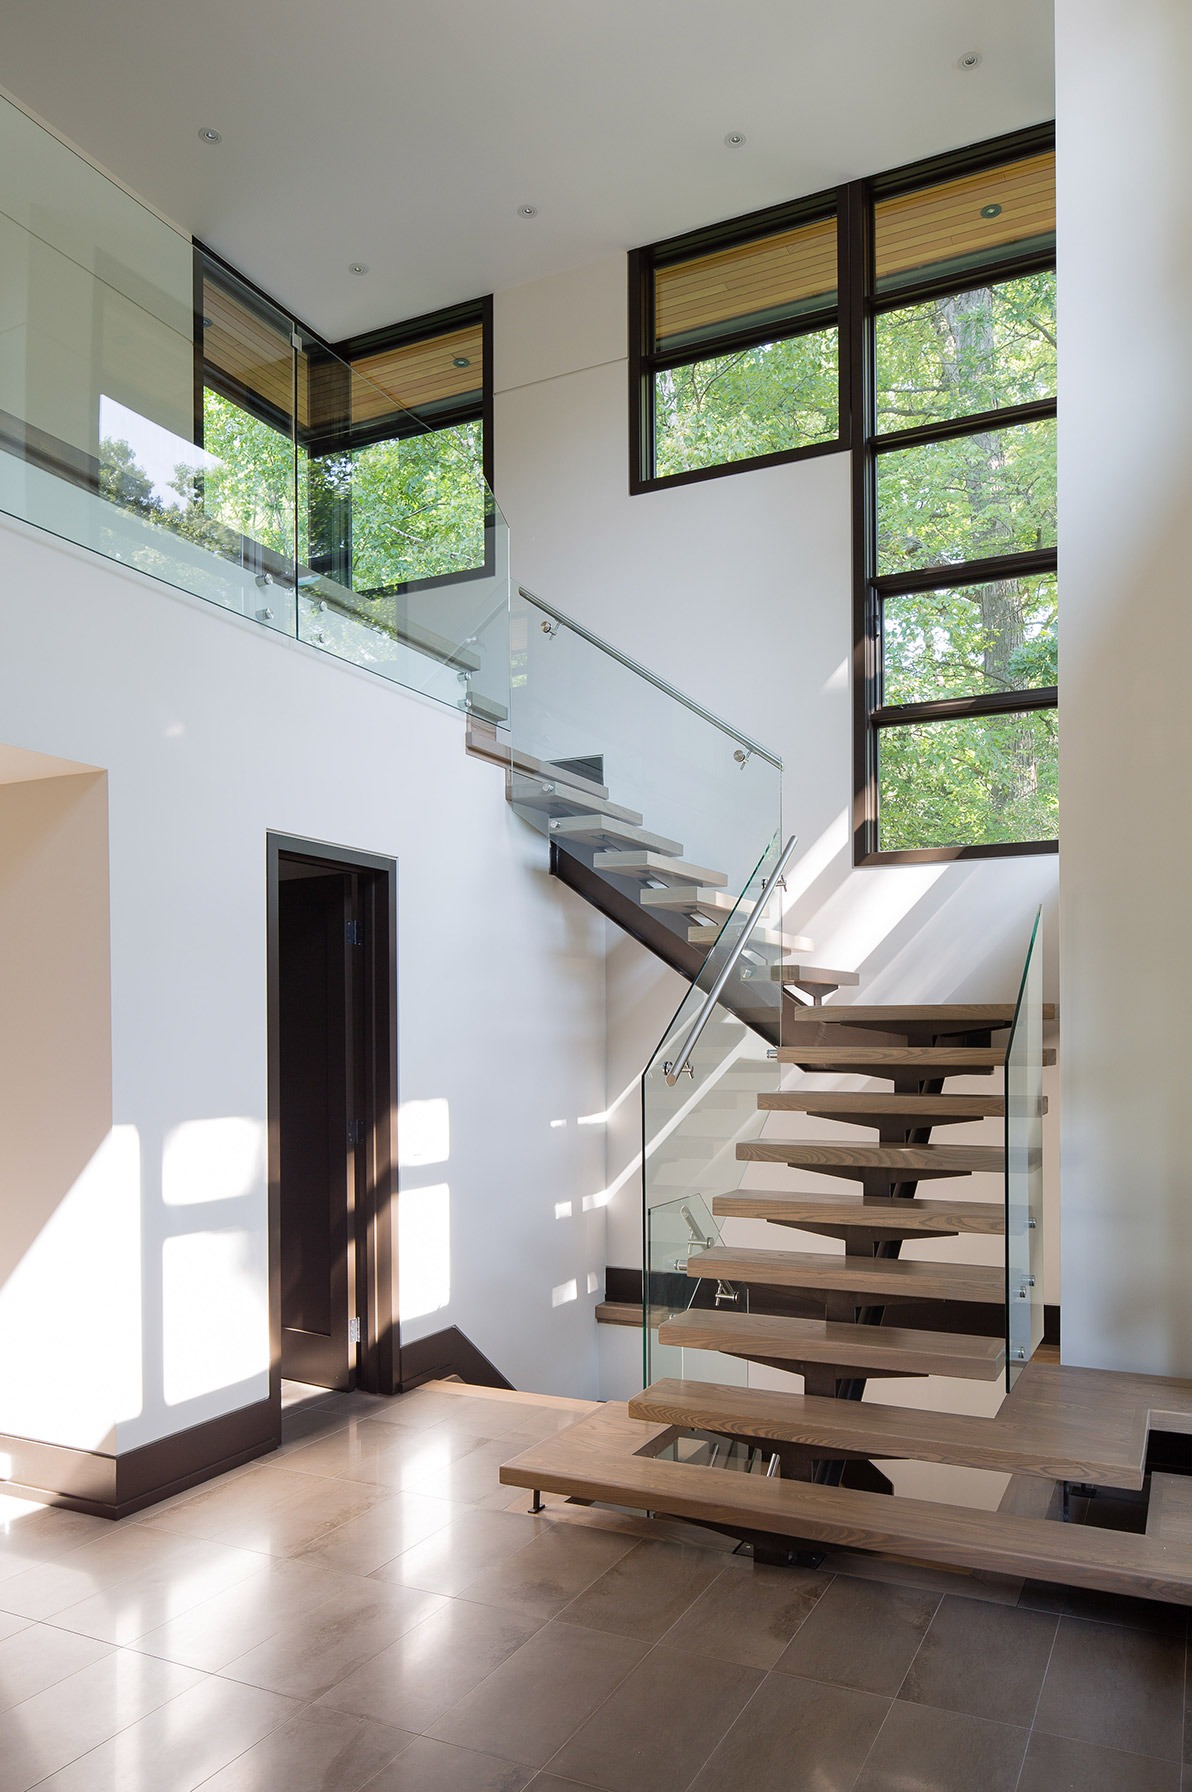 Modern floating stair with wood treads, tile floor and black baseboard.